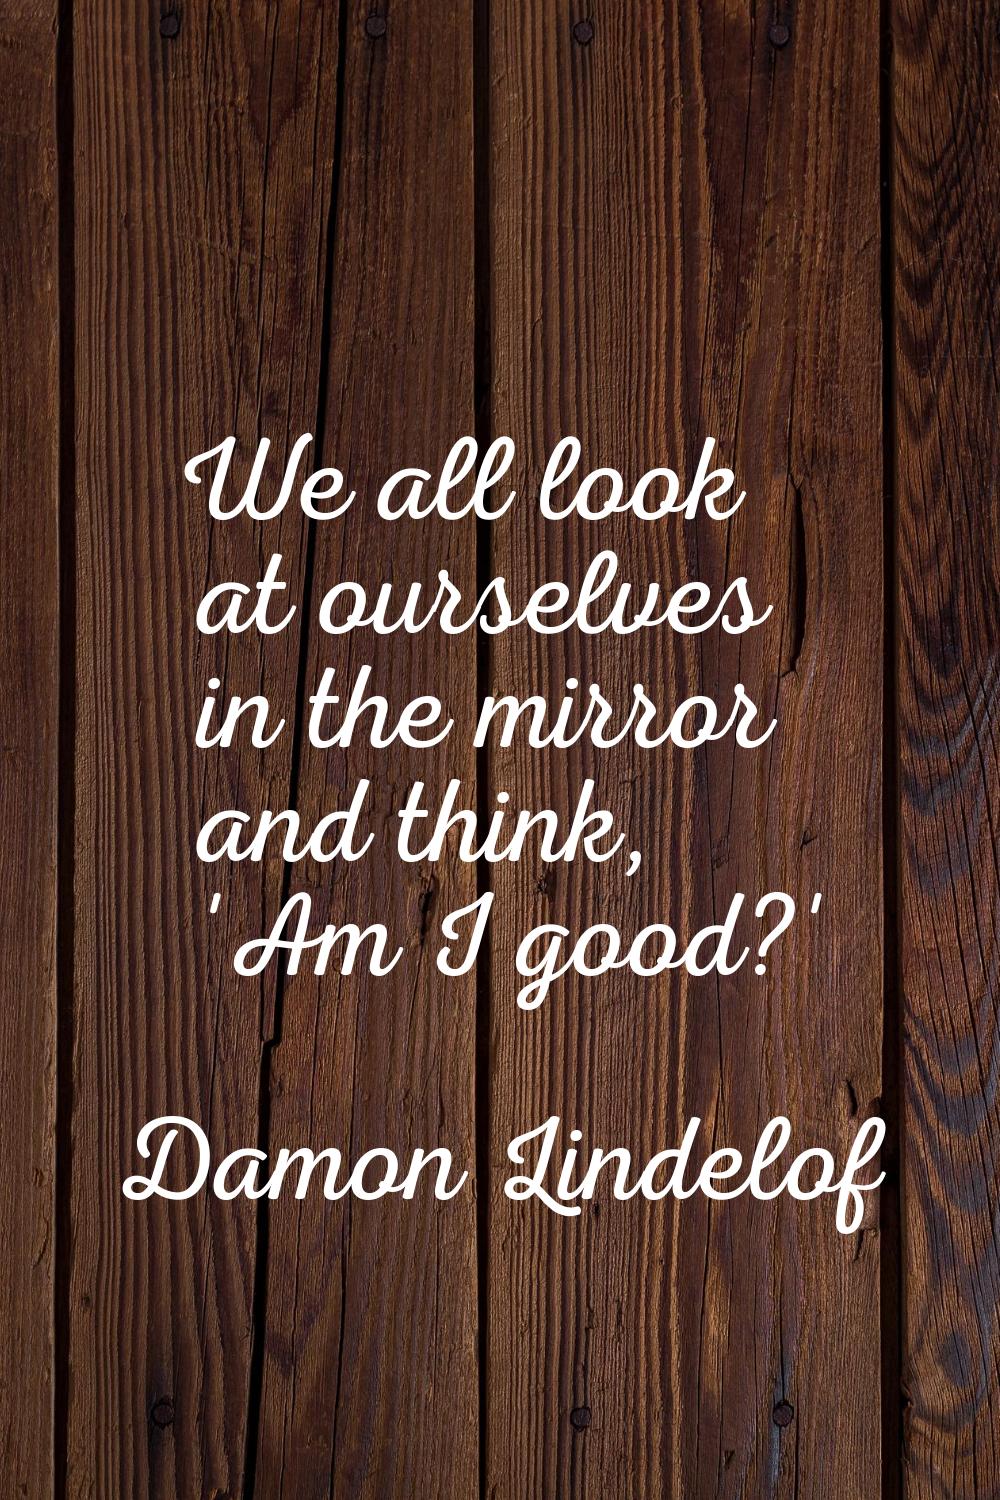 We all look at ourselves in the mirror and think, 'Am I good?'